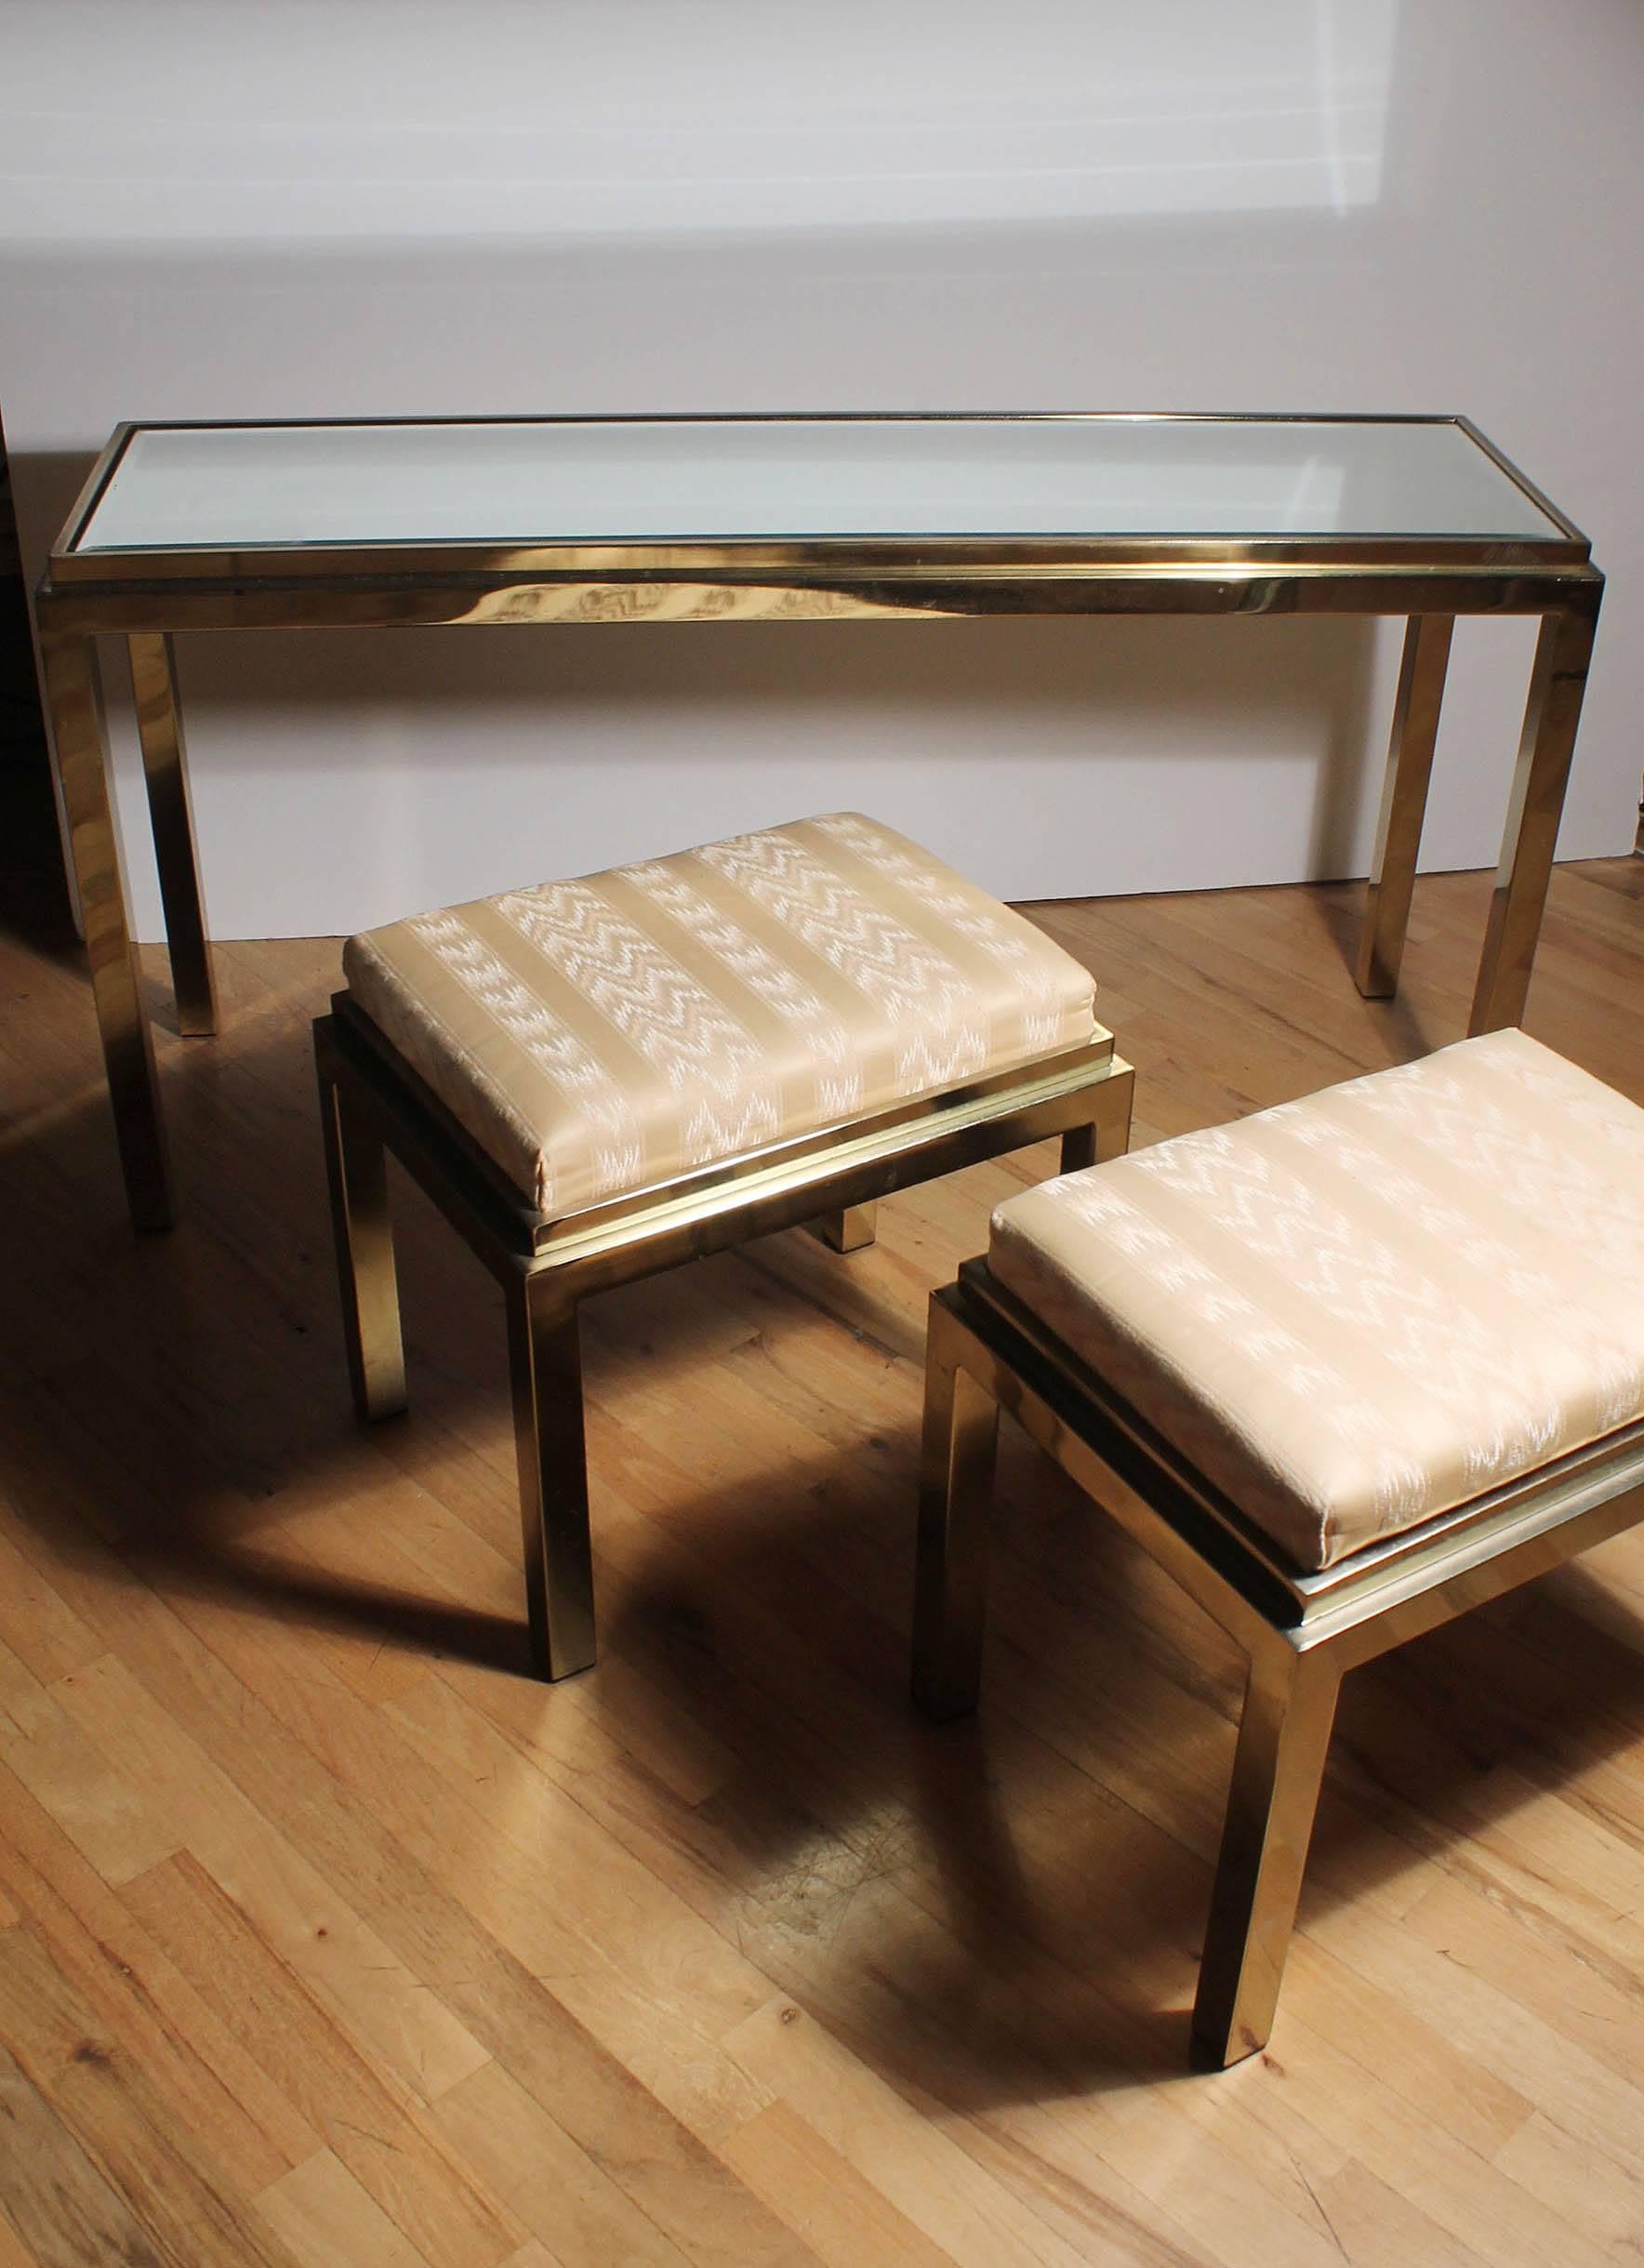 Brass plated console with matching stools in style of Milo Baughman.
Mirrored top.